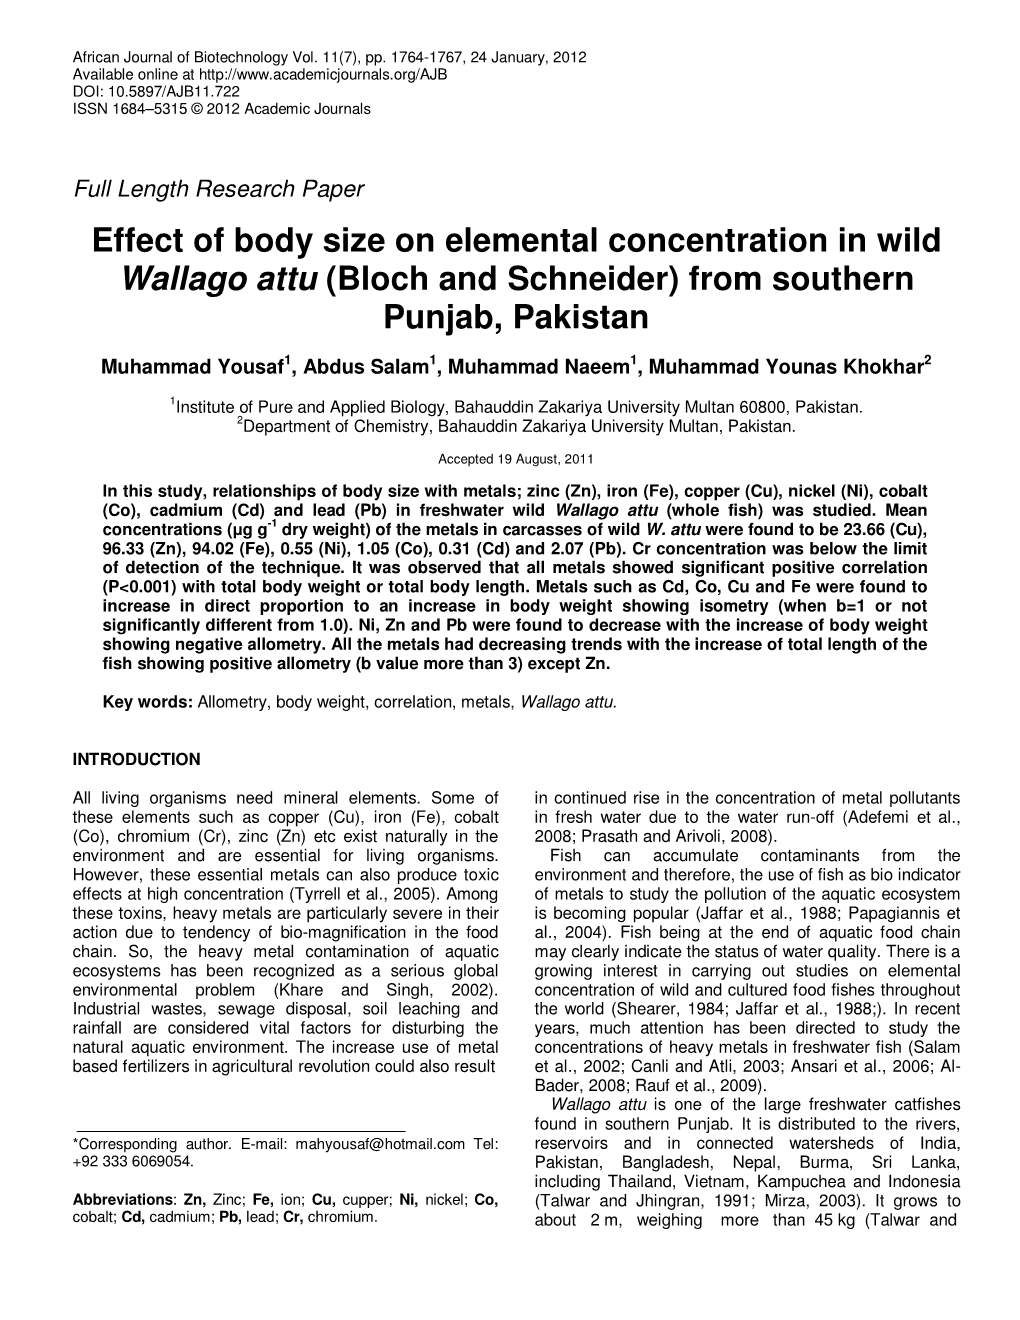 Effect of Body Size on Elemental Concentration in Wild Wallago Attu (Bloch and Schneider) from Southern Punjab, Pakistan